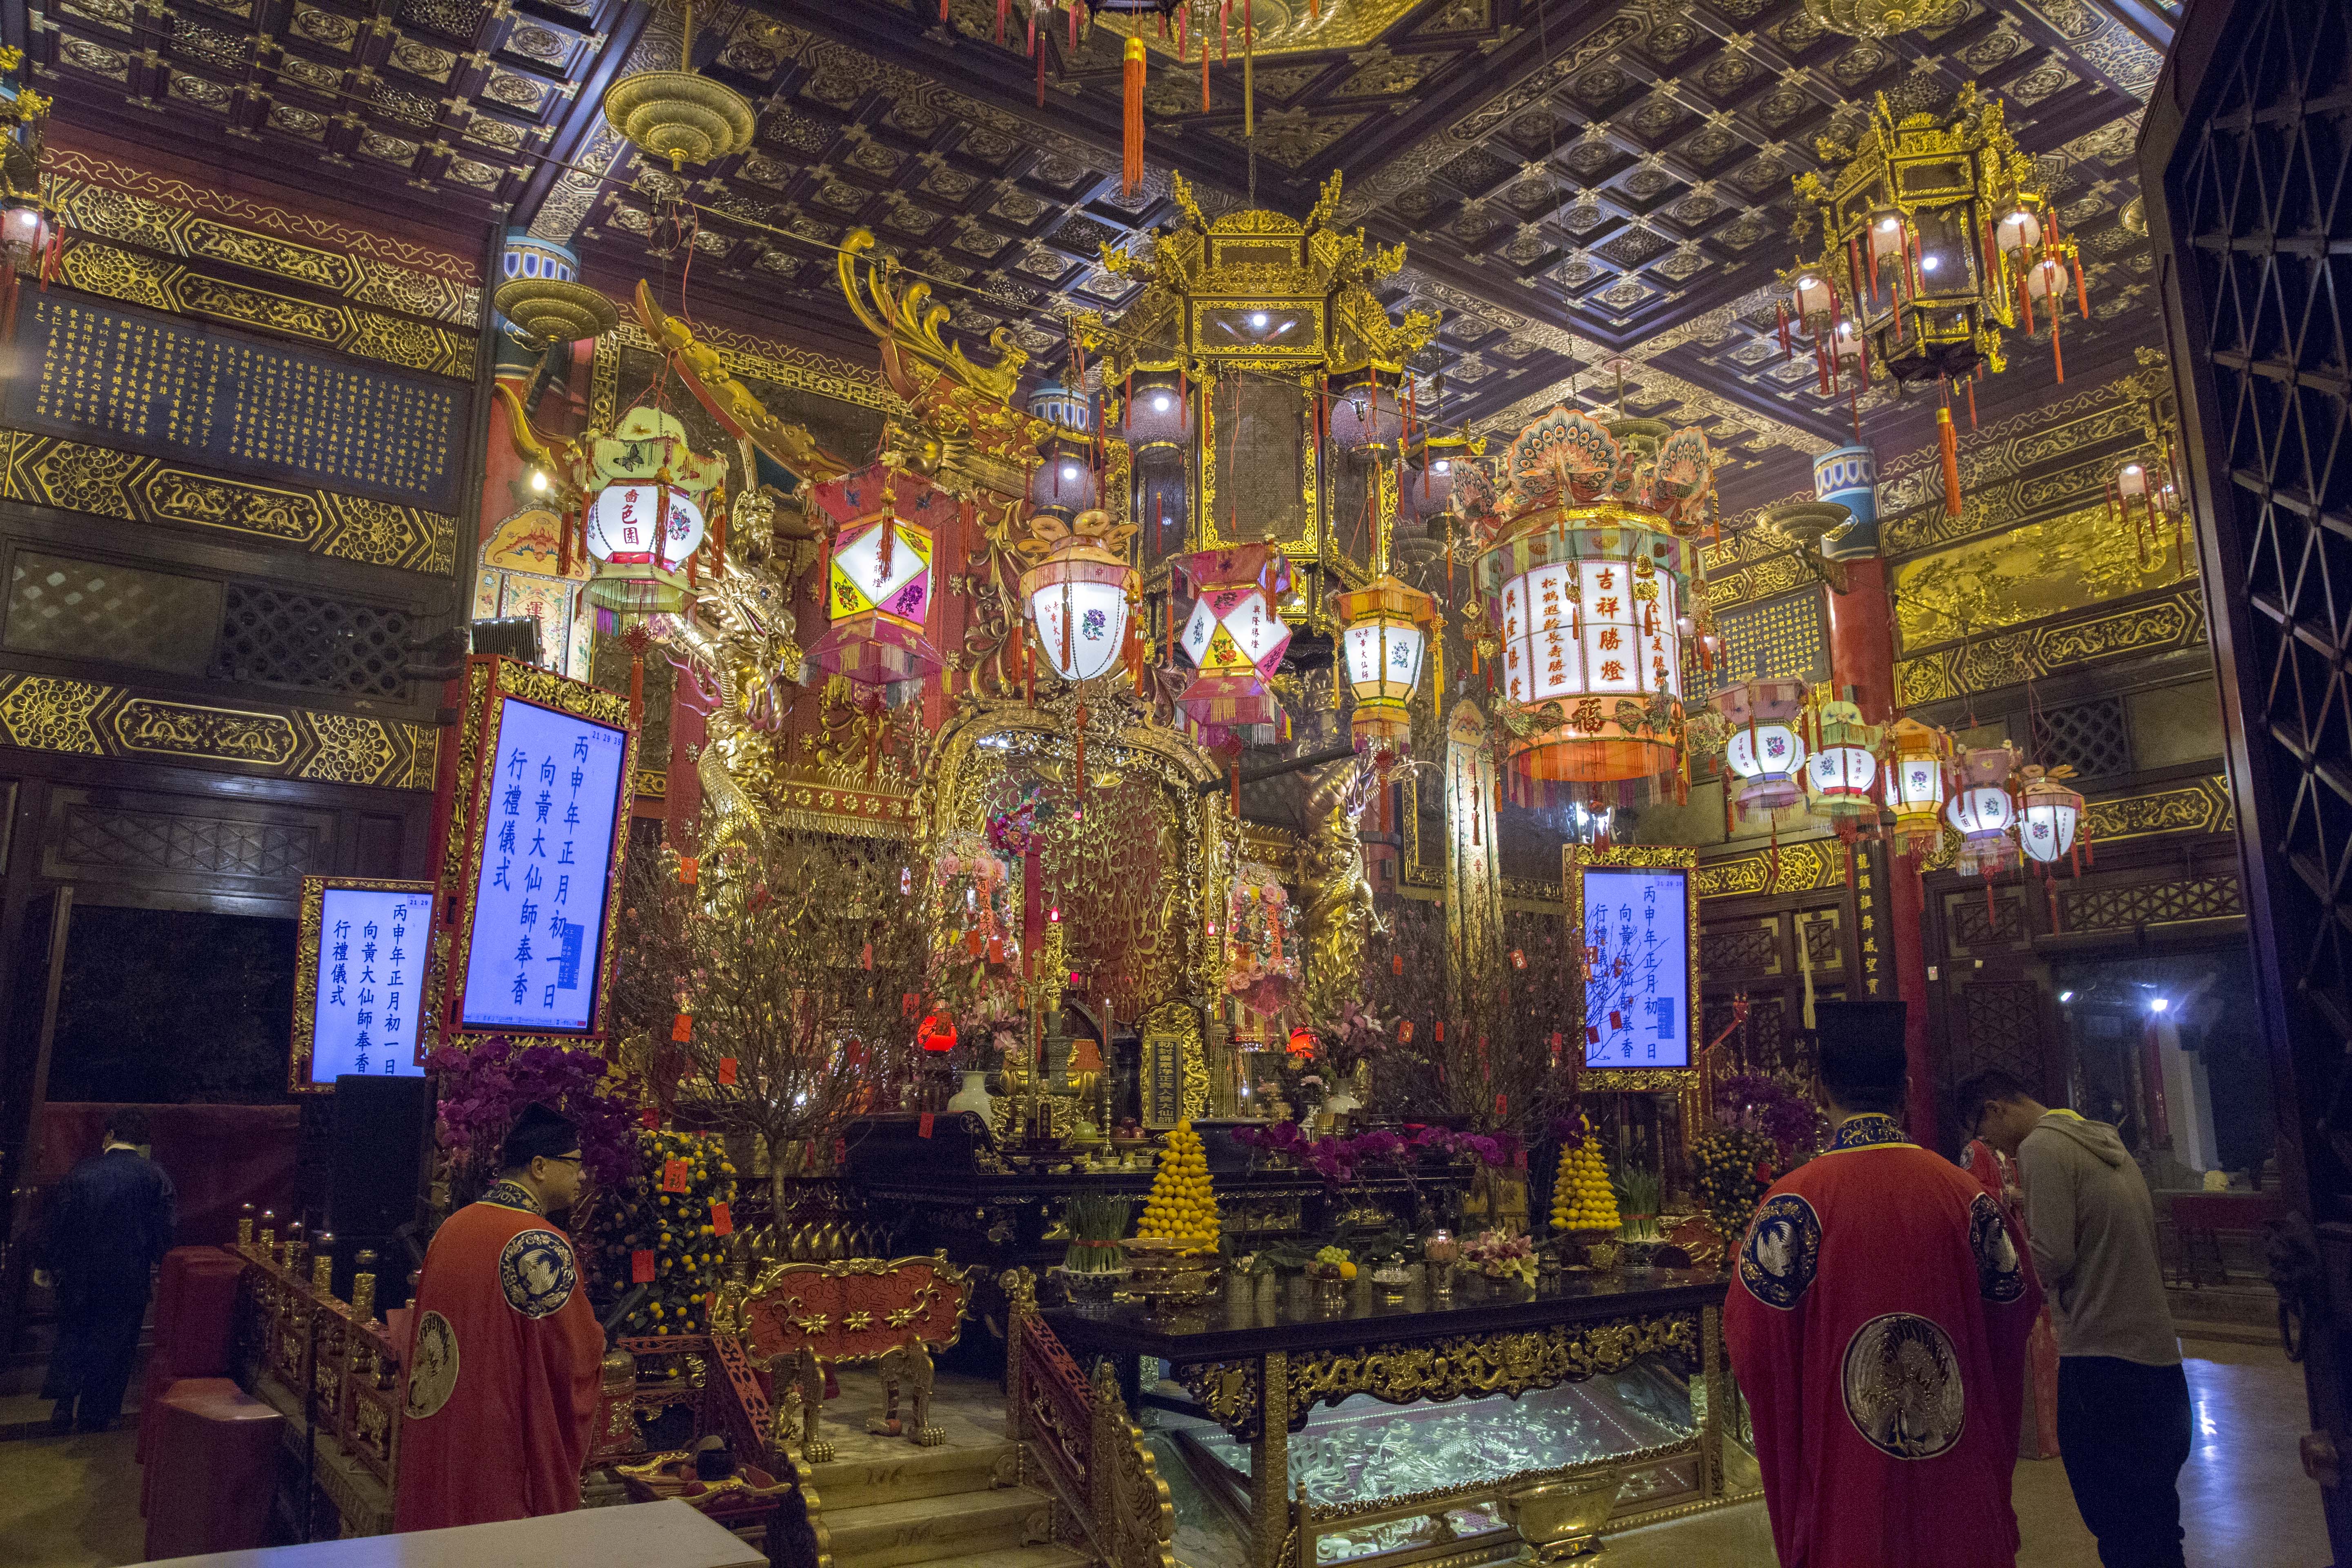 Guided Tour of the Wong Tai Sin Temple